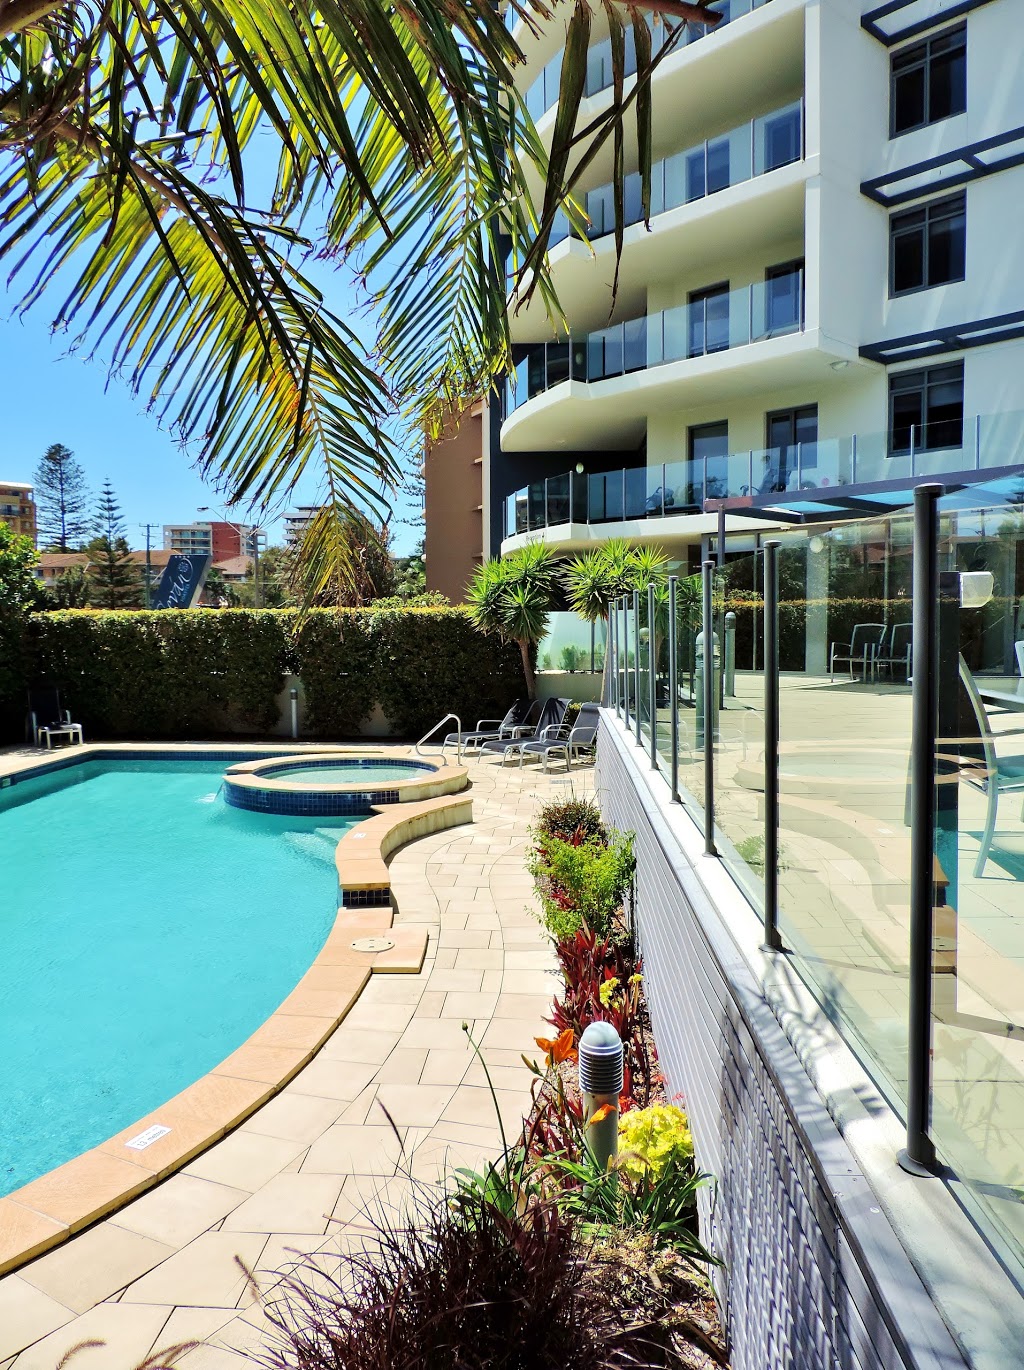 Sevan Apartments Forster | lodging | 14-18 Head St, Forster NSW 2428, Australia | 0265550300 OR +61 2 6555 0300